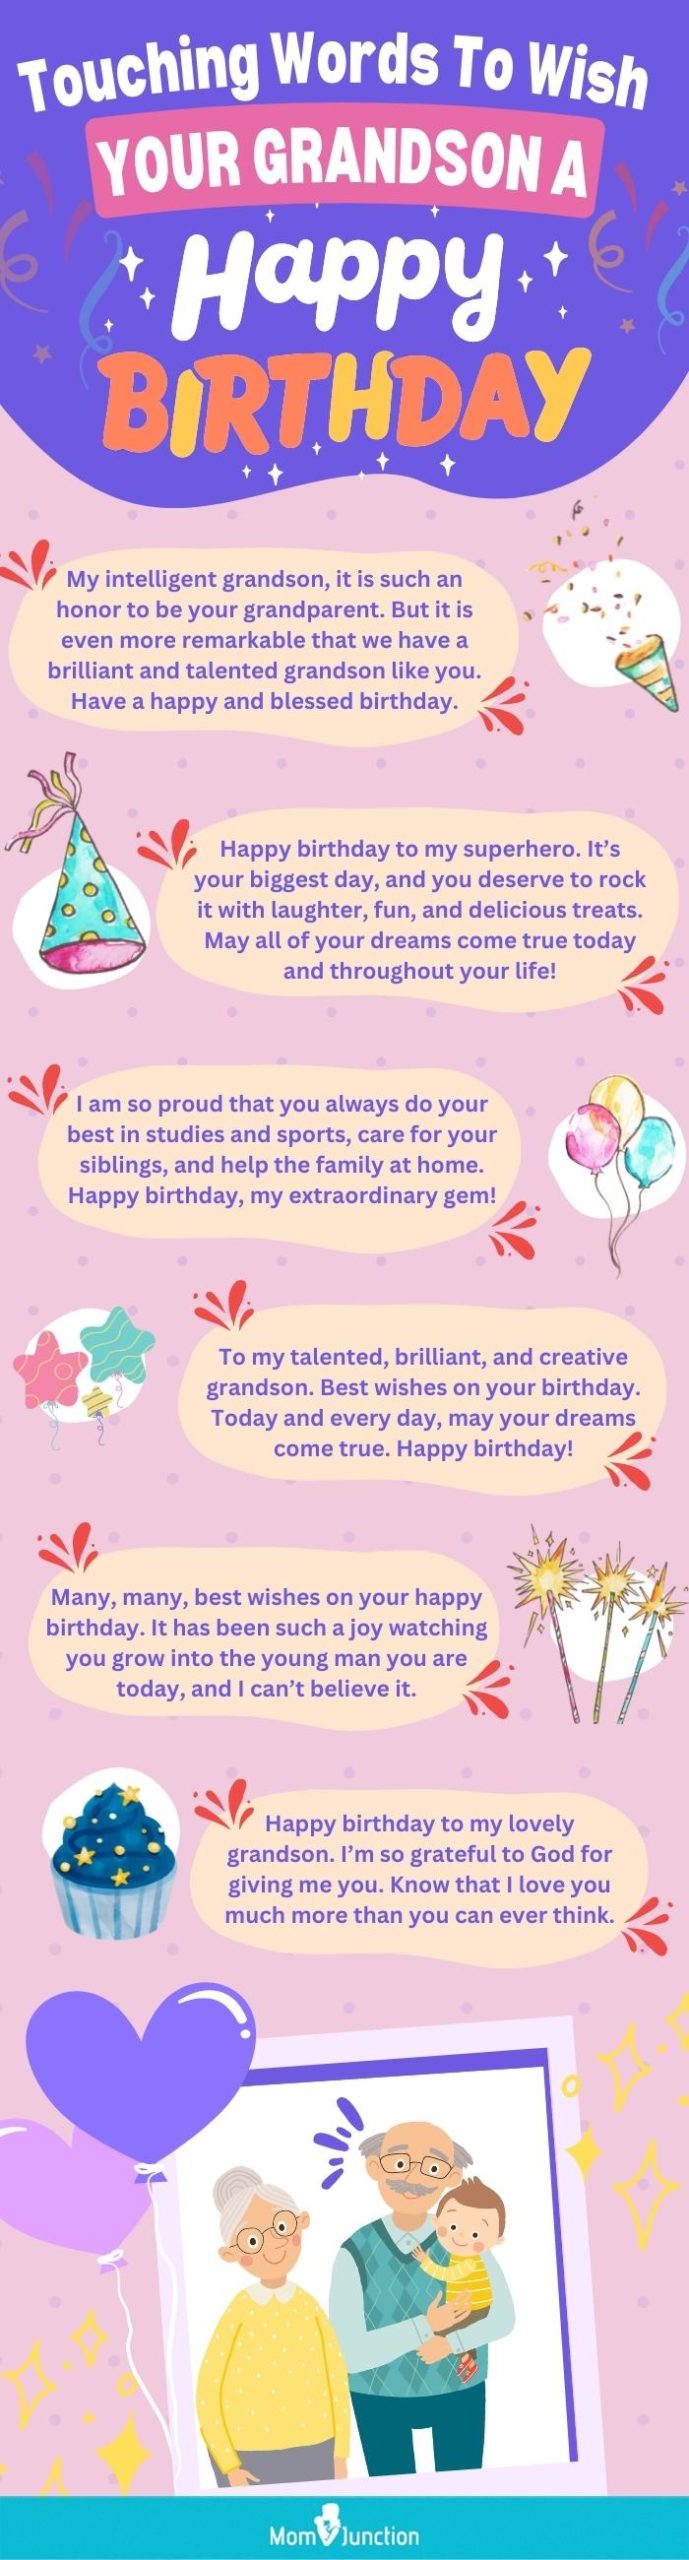 touching words to wish your grandson a happy birthday (infographic)